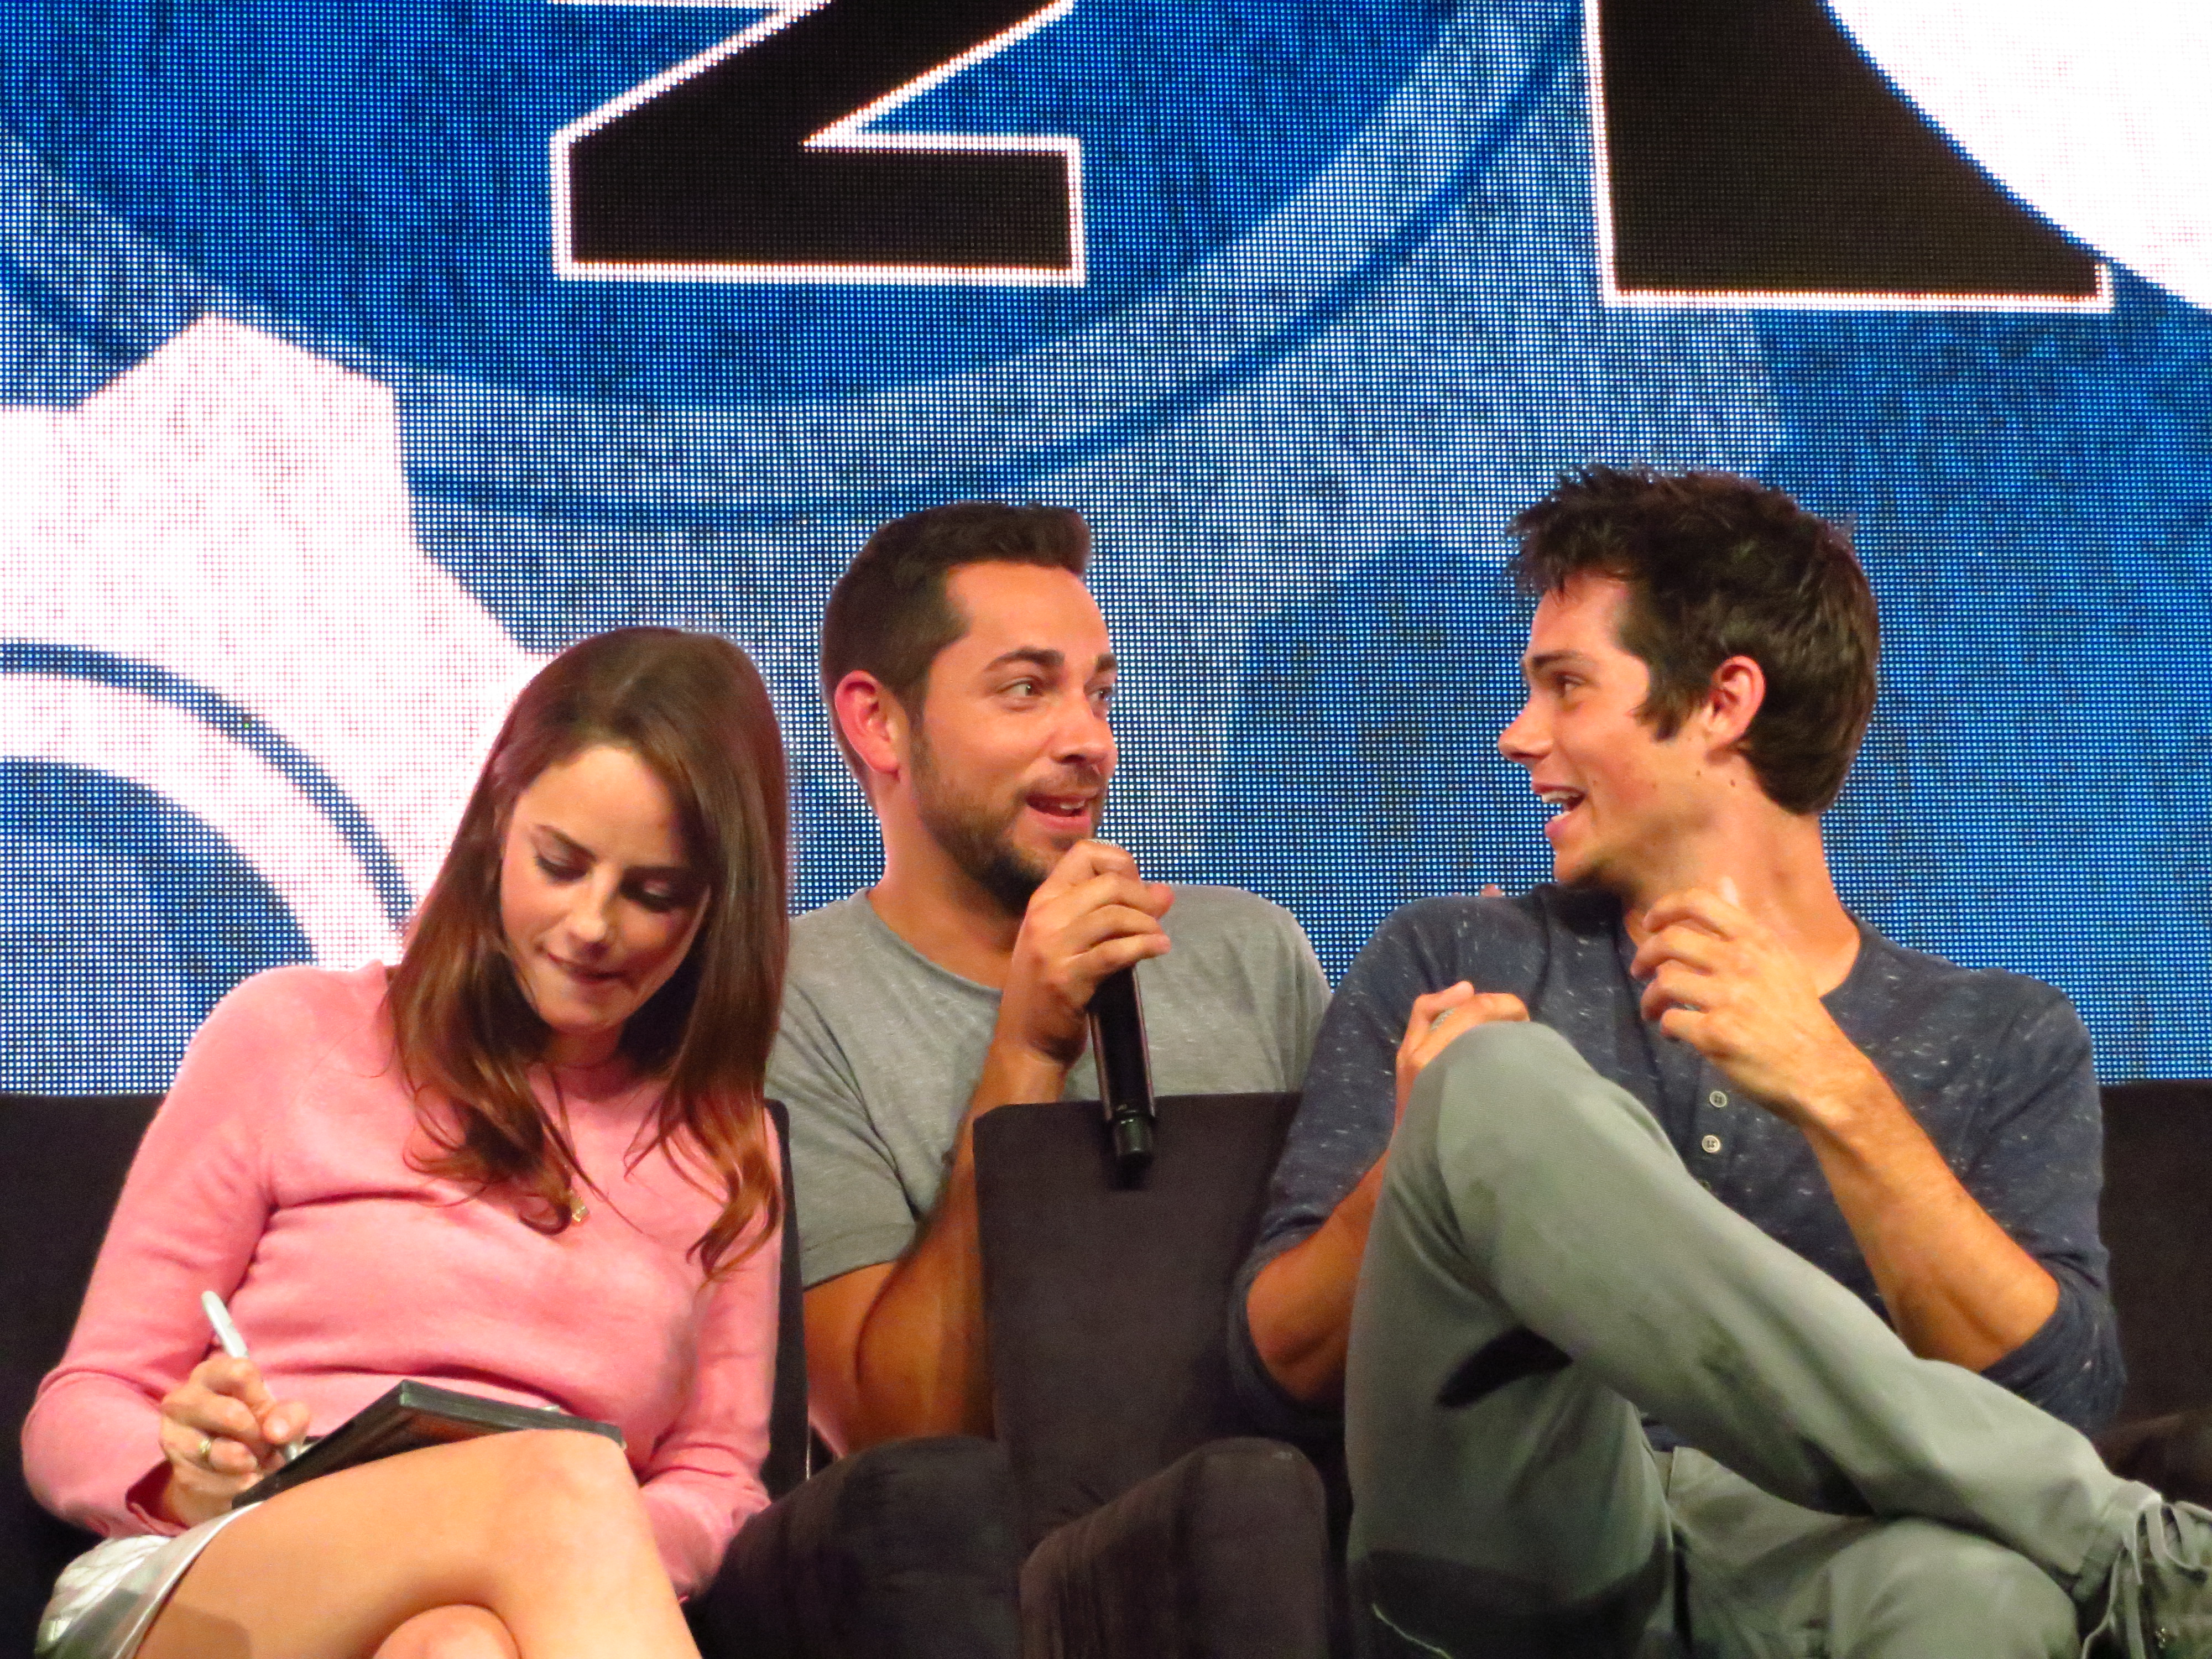 Zachary Levi surprises Dylan O'Brien in the Maze Runner panel